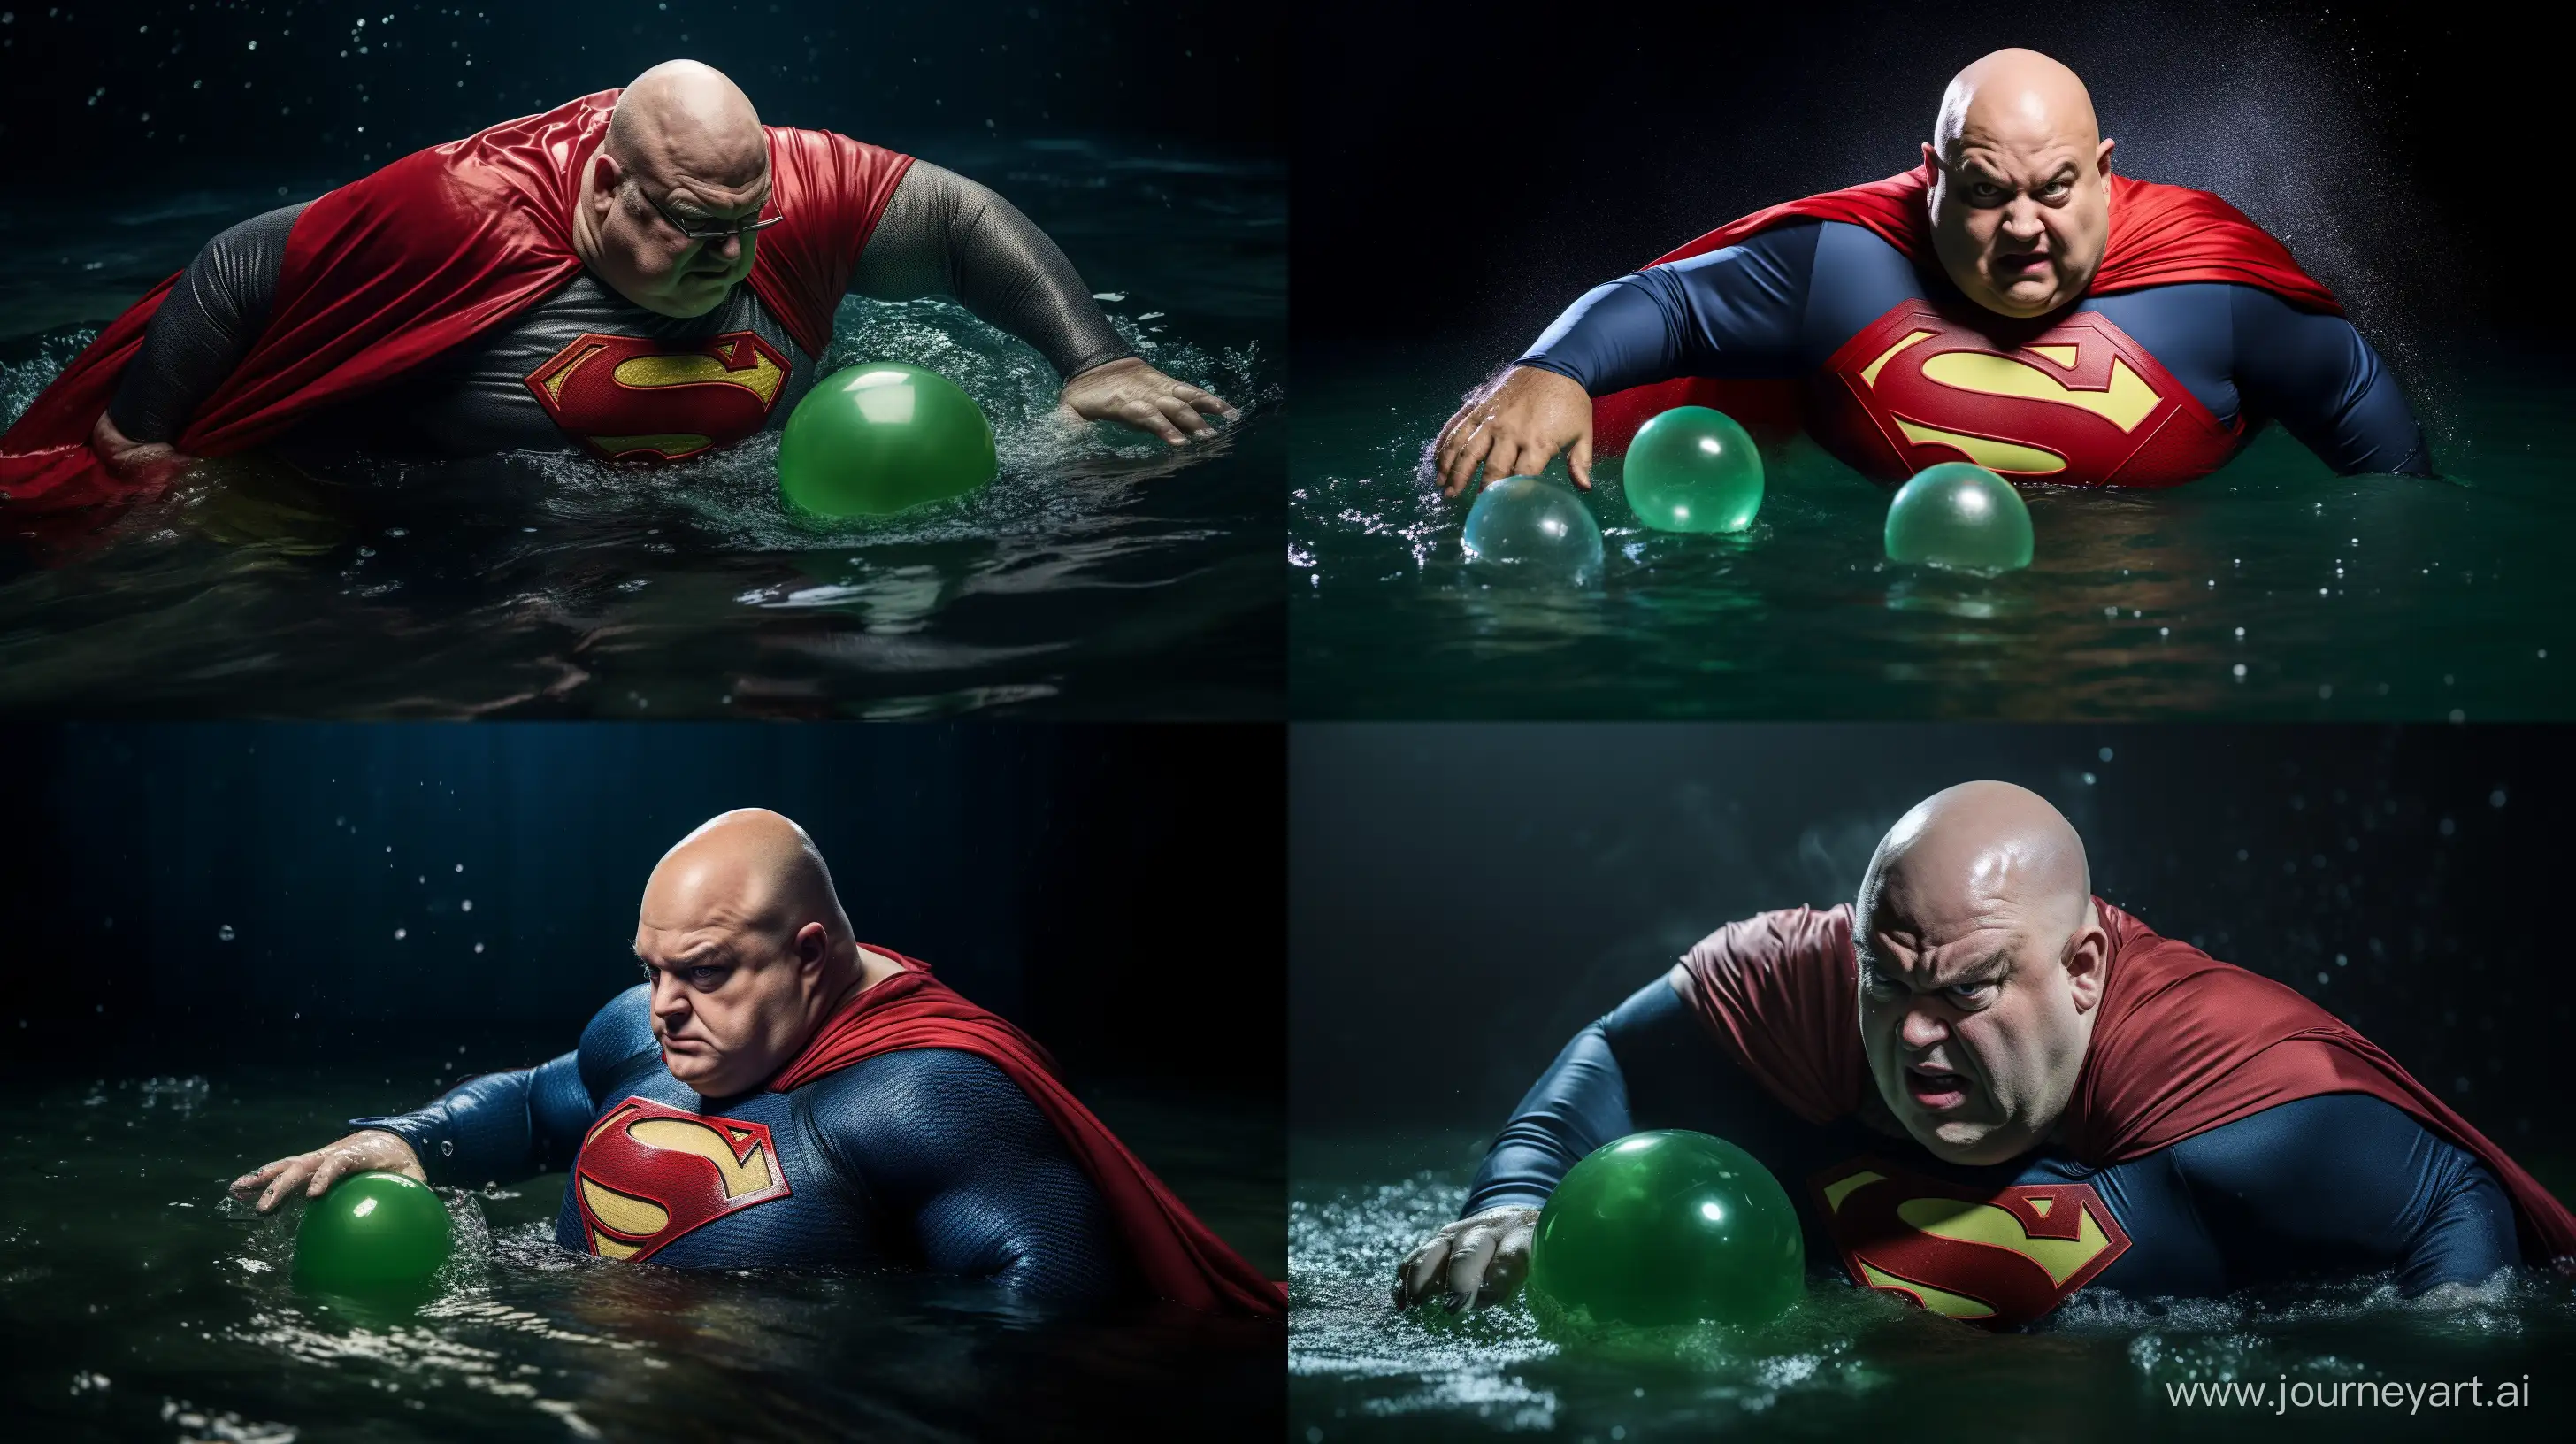 lateral view, chubby man, angry expression, 70 years old, in a pool, swimming away from a very small green illuminated ball, wet tight blue spandex superman costume, red cape, clean shaven, bald, sharp-focus, high-quality, award-winning photograph, Canon EOS 5D Mark IV DSLR, professional lighting setup, Adobe Photoshop --ar 16:9